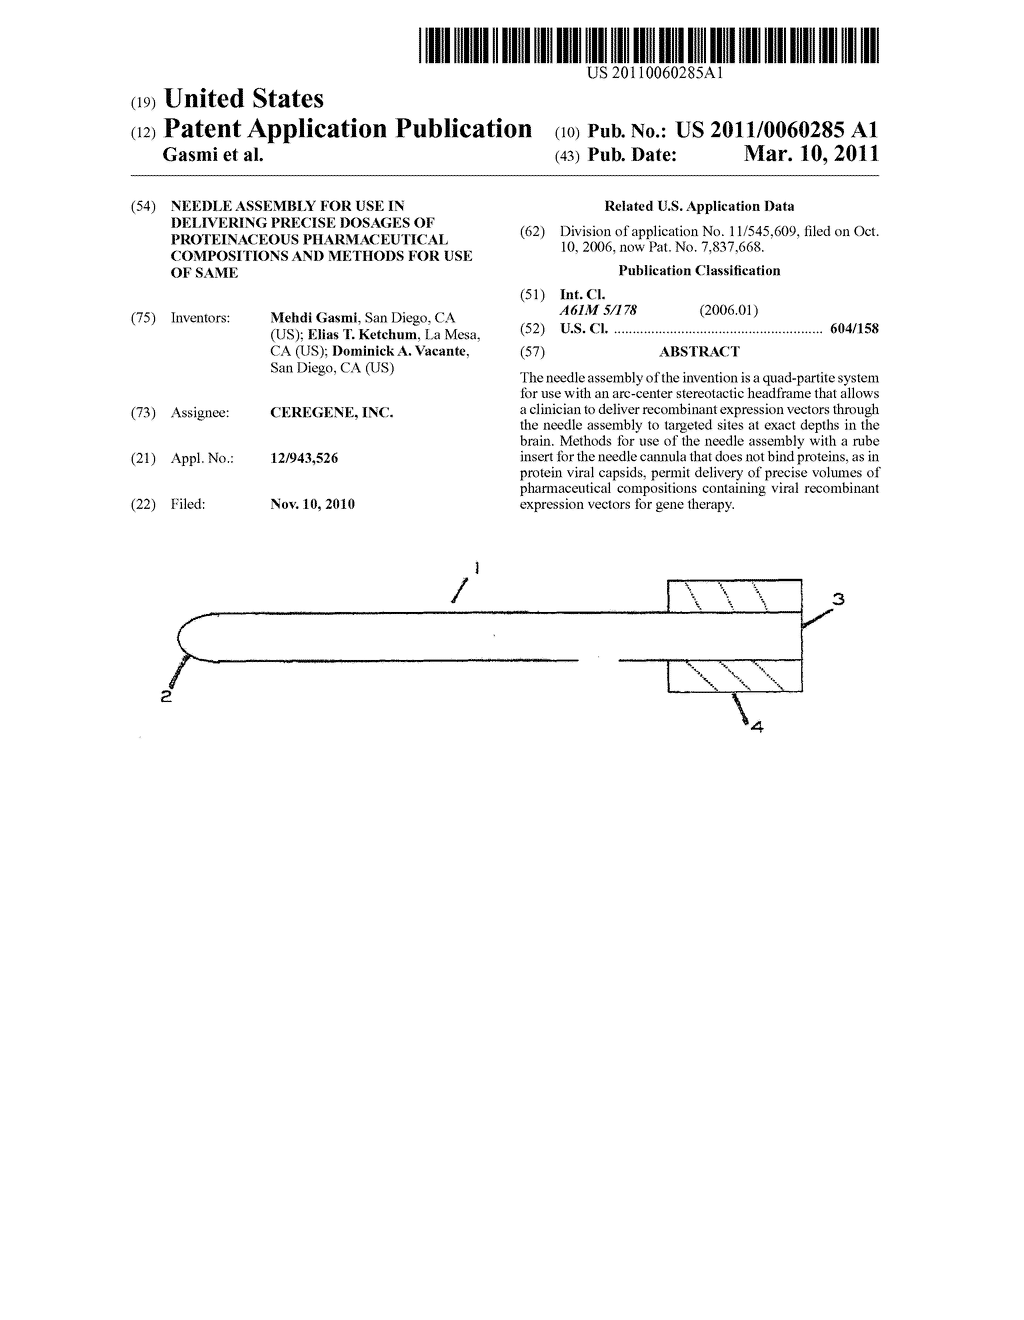 Needle Assembly for Use in Delivering Precise Dosages of Proteinaceous Pharmaceutical Compositions and Methods for Use of Same - diagram, schematic, and image 01